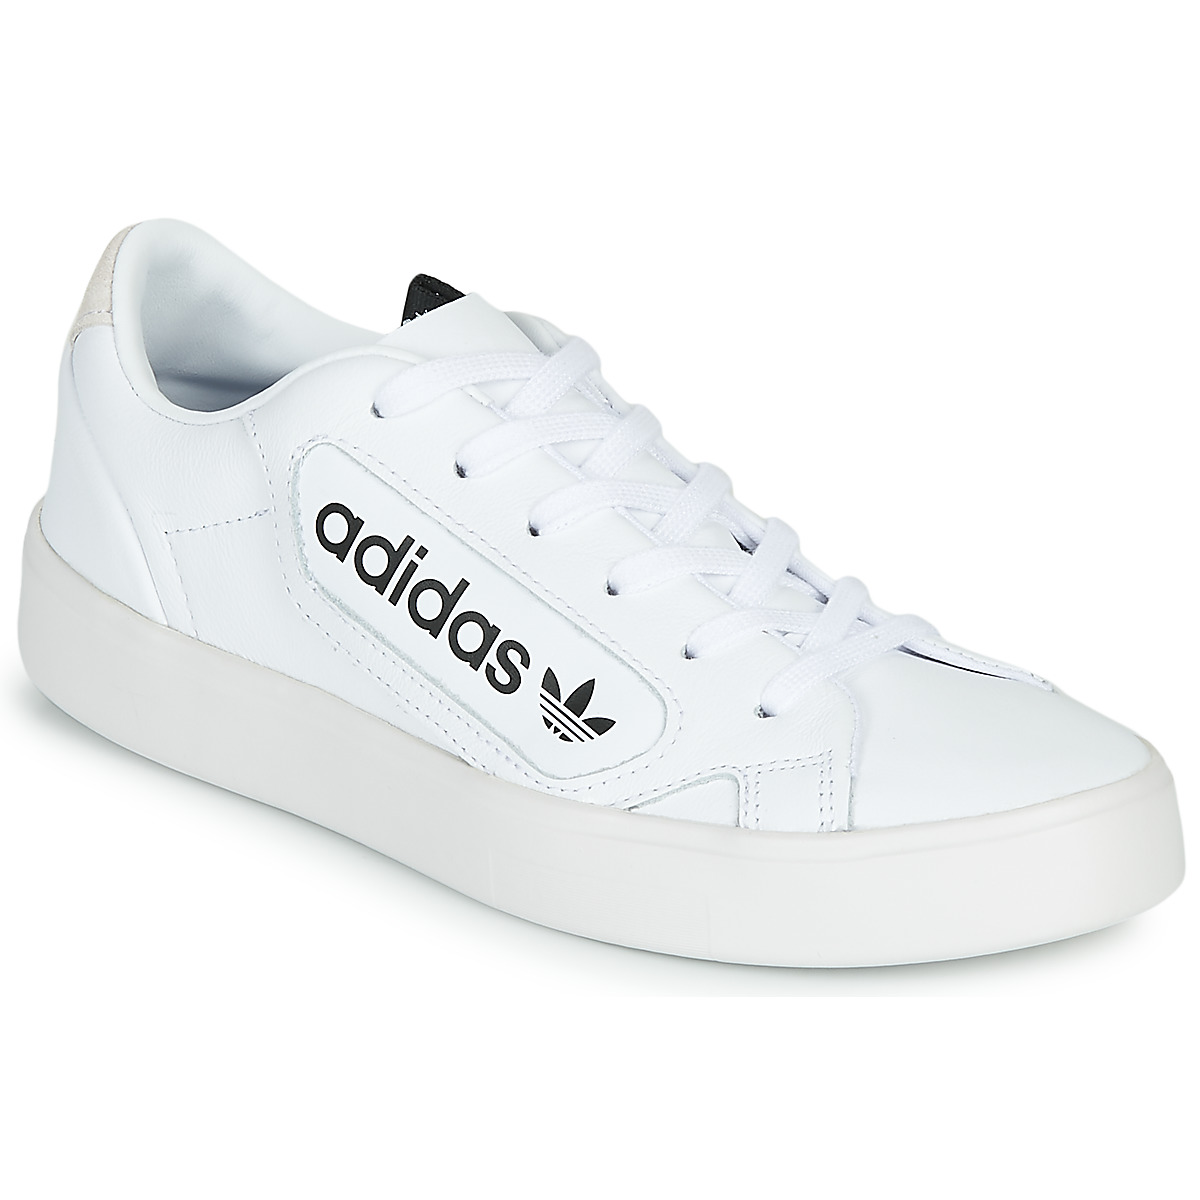 adidas Originals adidas SLEEK W White - Free delivery | Spartoo UK ! -  Shoes Low top trainers Women £